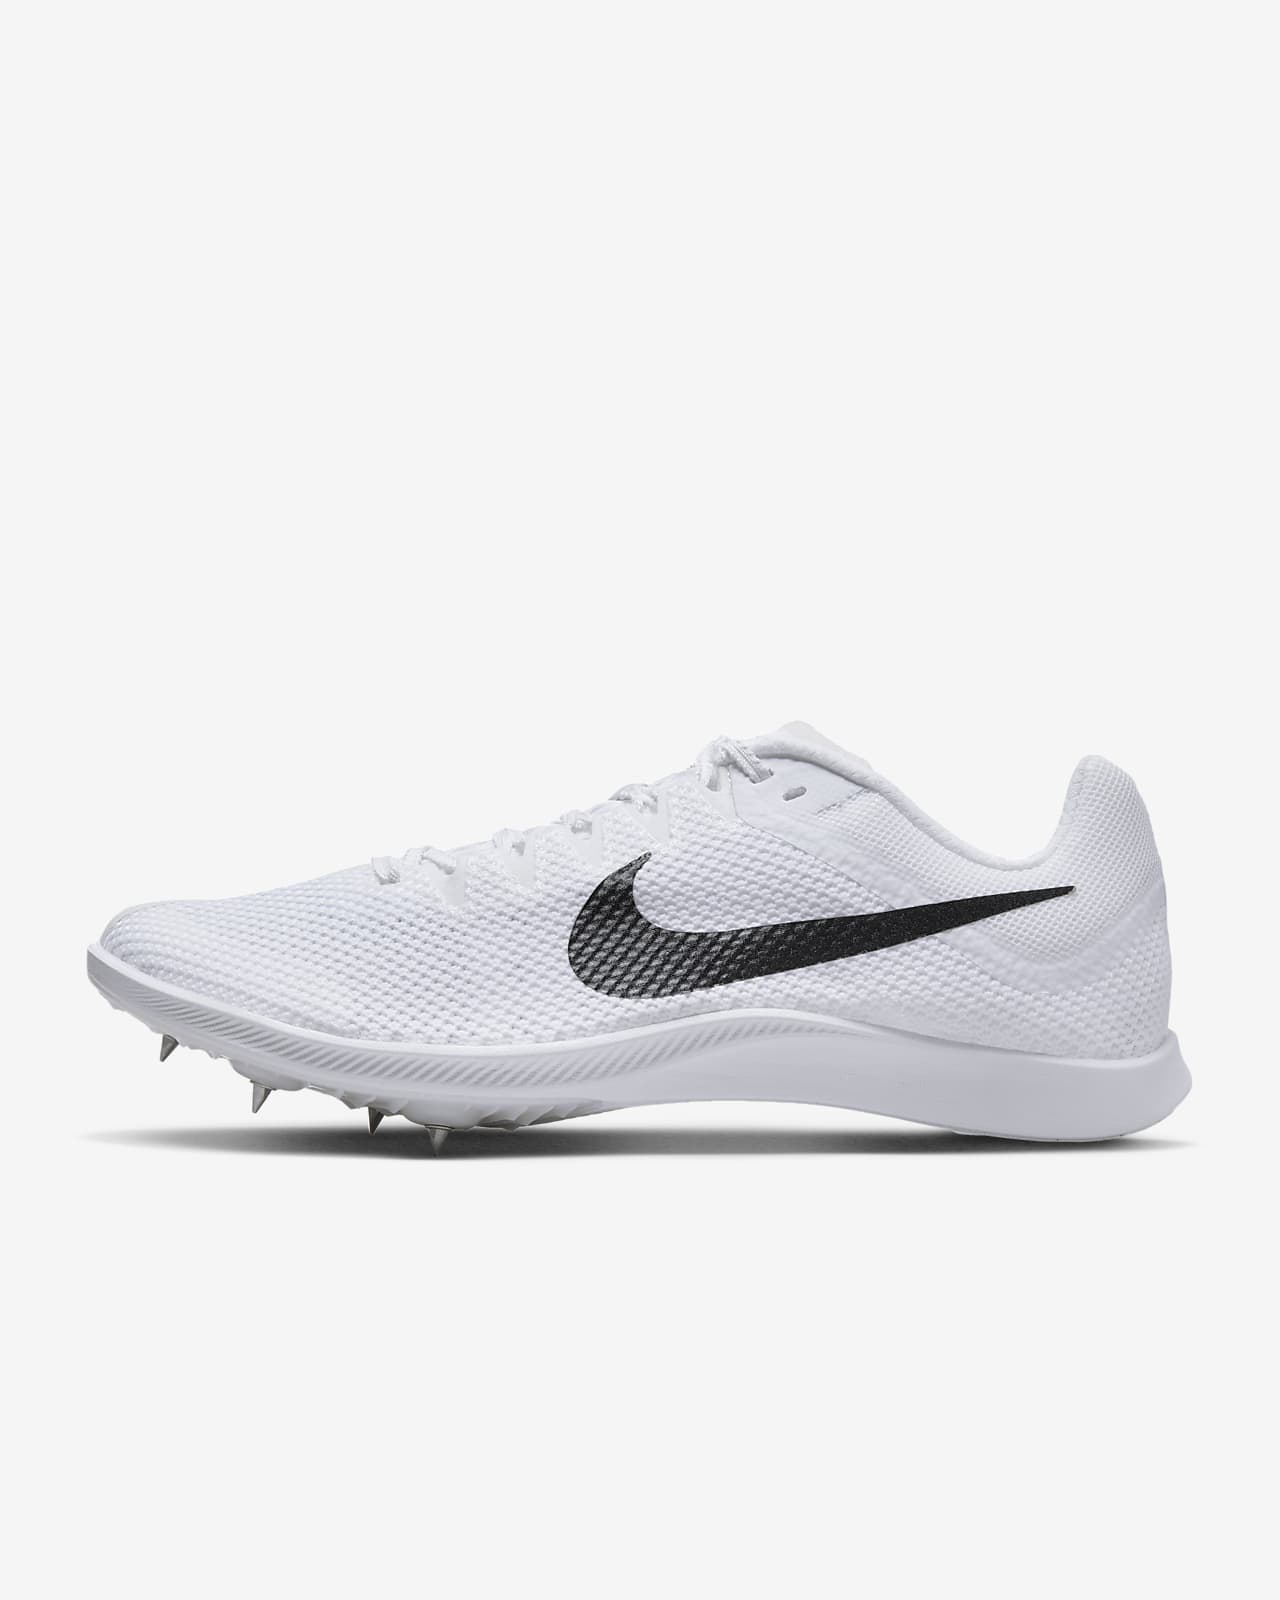 Nike Rival Distance Track & Field Distance Spikes